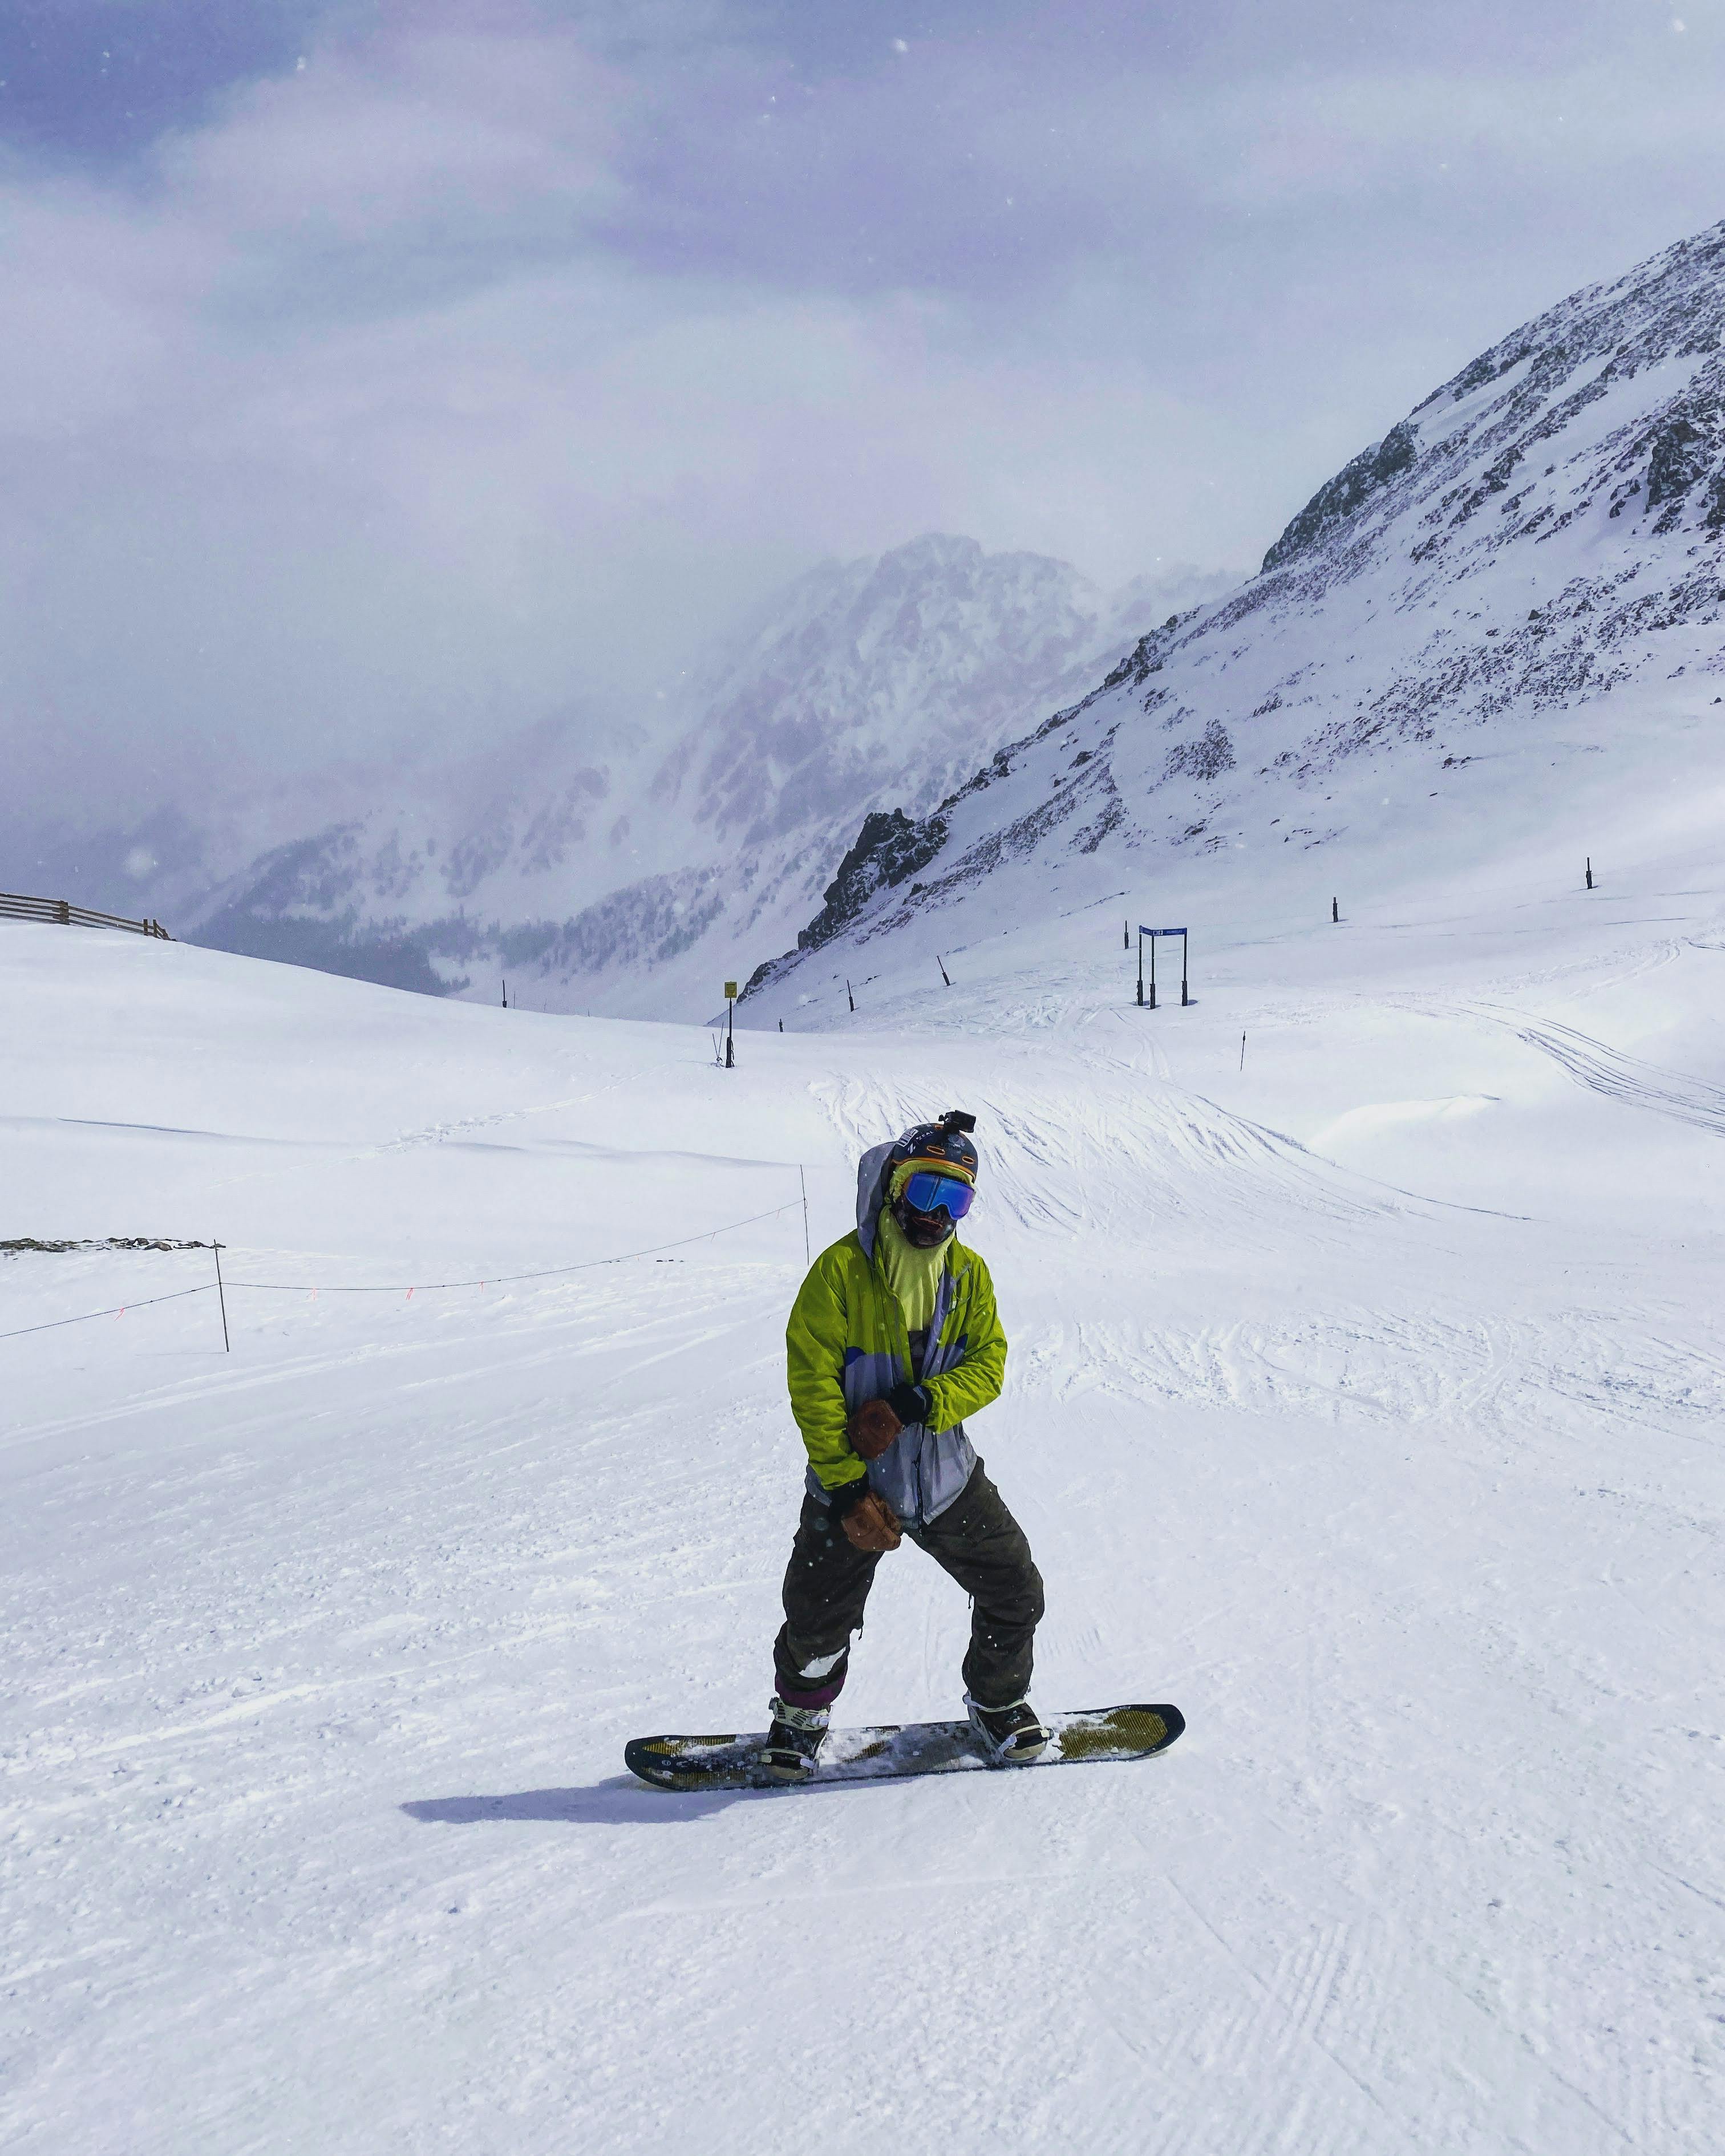 The author stands on his board on an empty, snowy hill. Dramatic, foggy peaks are in the background. 